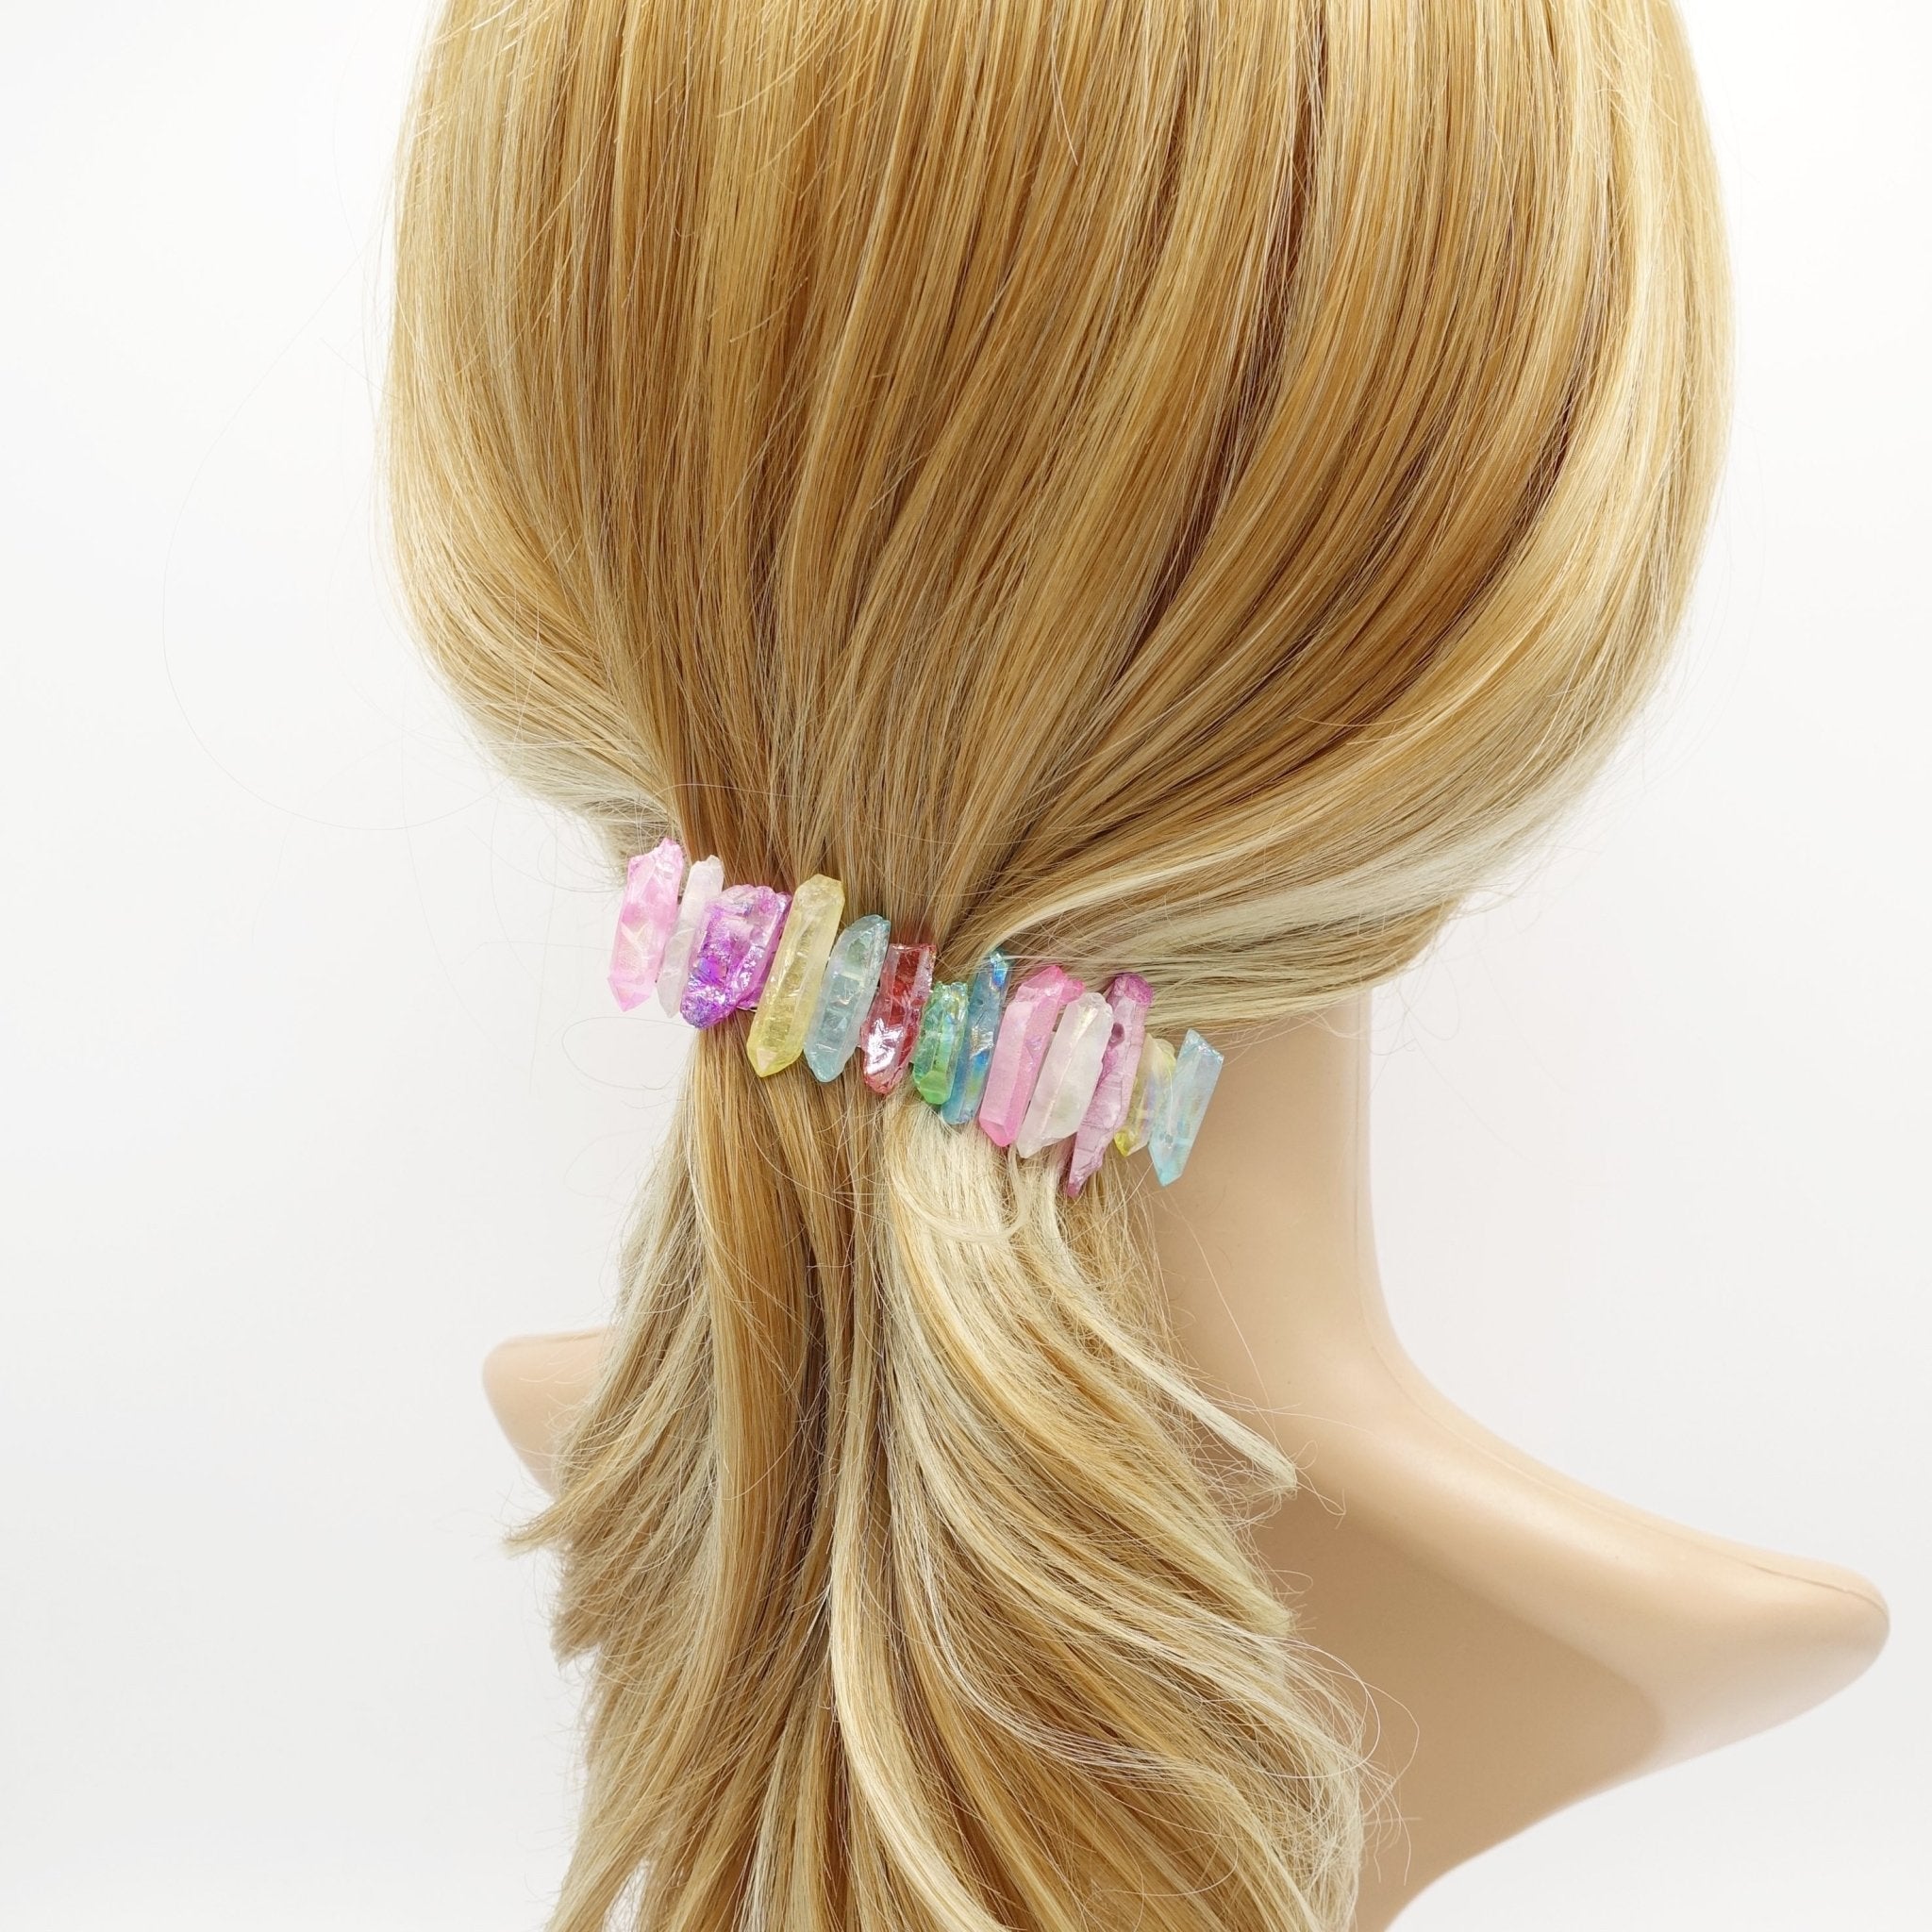 VeryShine crystal stone hair barrette quartz dyed natural hair accessory for women